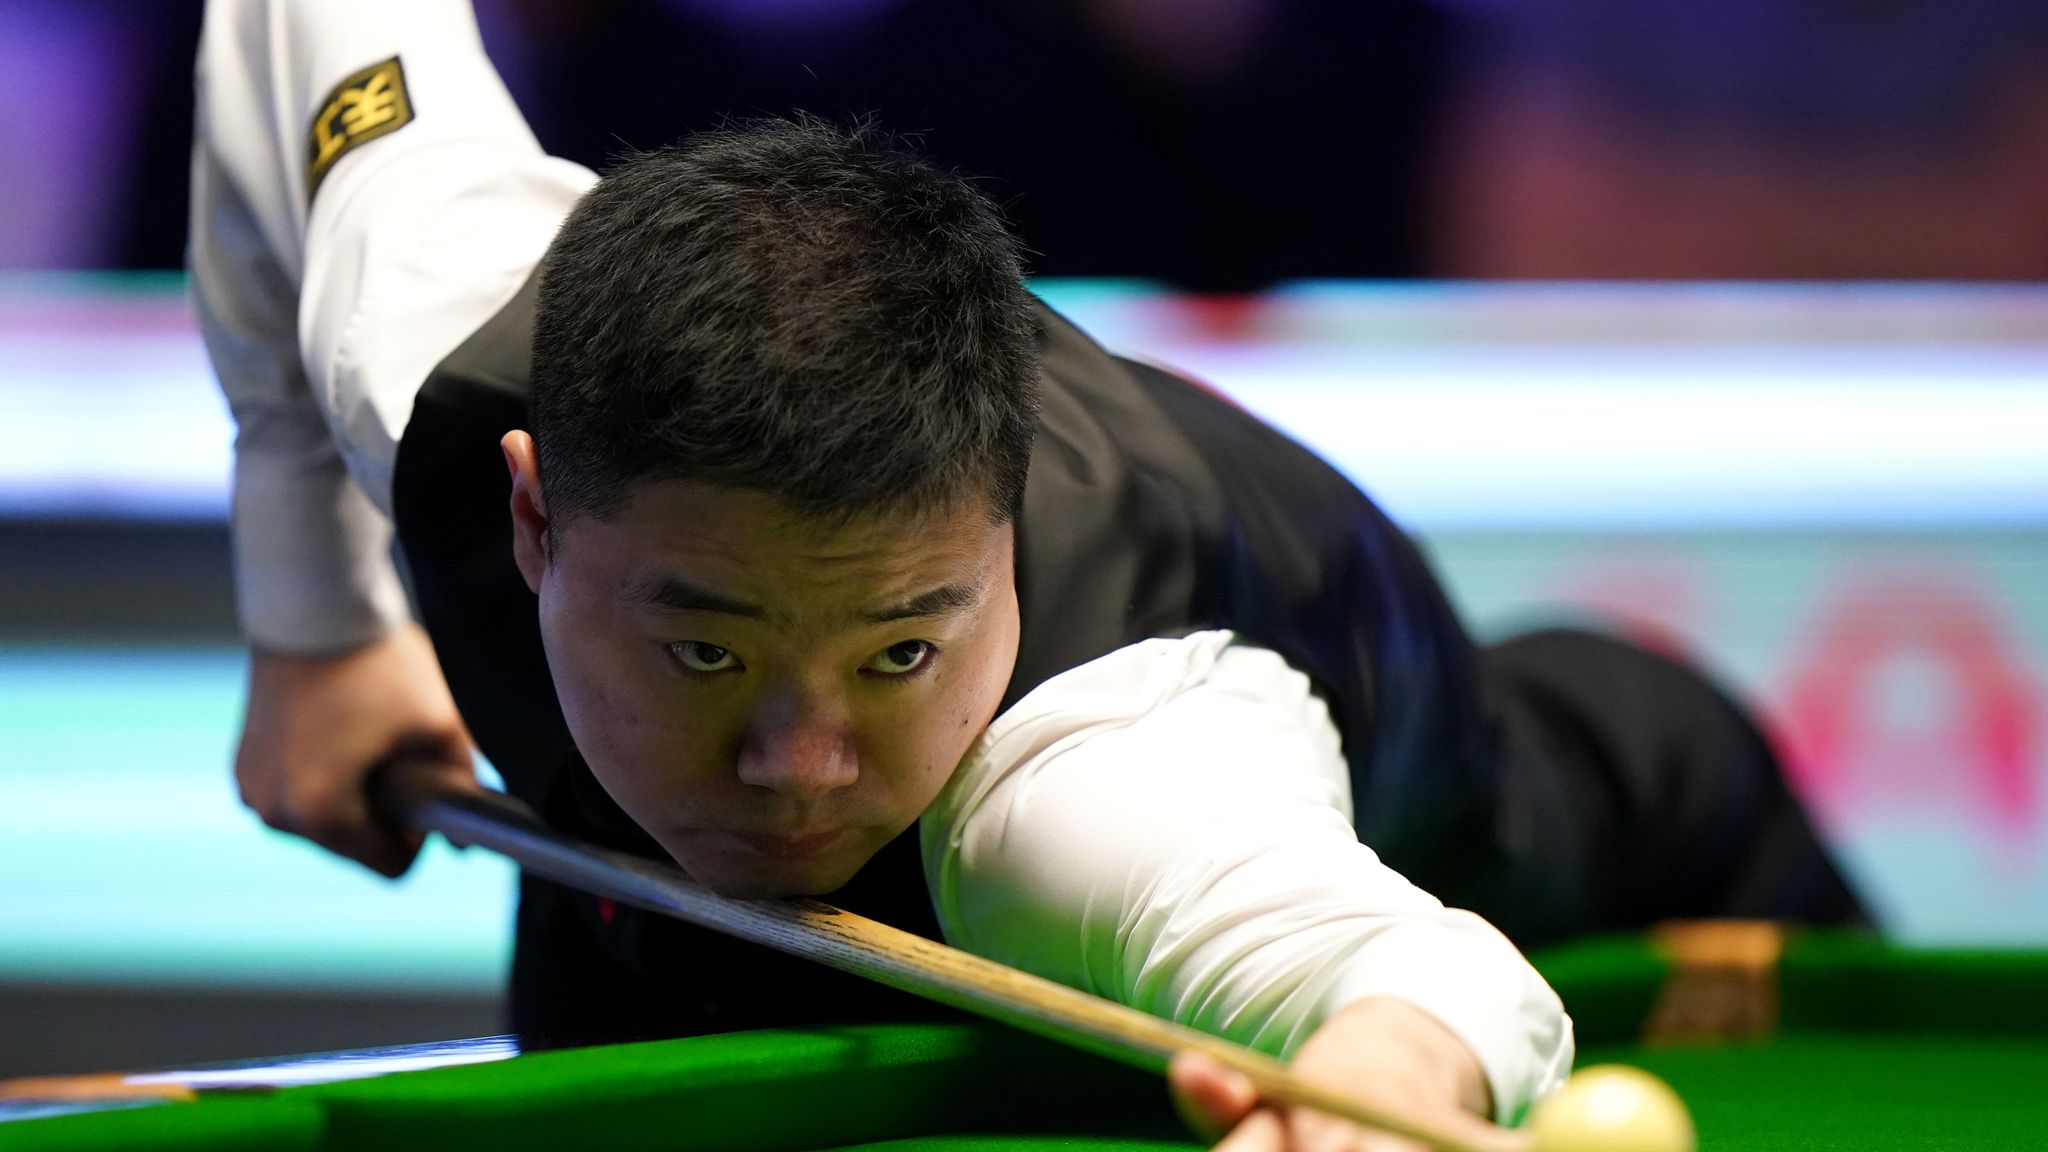 UK Championship Ronnie OSullivan thrashed 6-0 by Ding Junhui in quarter- finals in York Snooker News Sky Sports